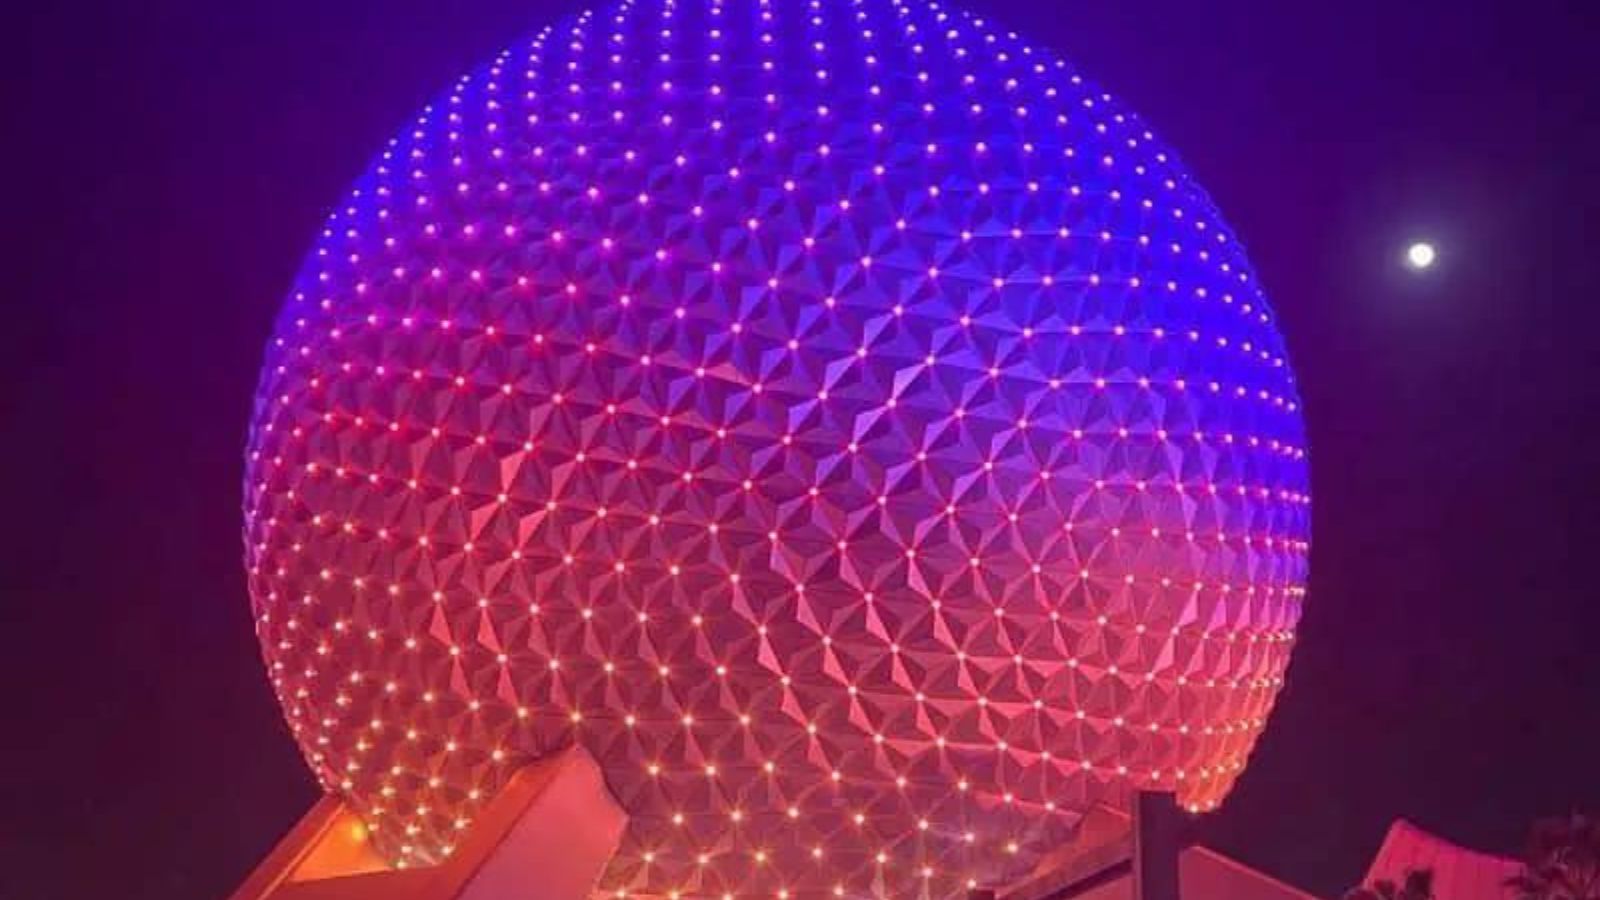 <p>Epcot theme park is a Disney park that was built in 1982. It is made to look like the future. There are two parts, Future World and World Showcase.</p><p>The Future World has rides and buildings that show how technology will change the future and the World Showcase has different countries with their own food, music, and culture.</p><h4 class="wp-block-heading">Future World</h4><p>Future World is divided into three “neighborhoods”, each representing a different focus.</p><ul> <li><strong>World Celebration</strong> – connect with a global community and ride Spaceship Earth</li> <li><strong>World Discovery –</strong> Explore the wonders of science and technology. Ride Test Track and Mission: Space</li> <li><strong>World Nature</strong>– Ride Soarin and meet Nemo and friends!</li> </ul><h4 class="wp-block-heading">World Showcase</h4><p>This truly unique part of the park gives you the opportunity to “travel” around the world and learn about different countries and cultures. </p><p>Each area is themed with music, smells, food, and shops that represent the country.</p><p> Look for your favorite Disney Characters, but remember they will only be in the country they are from.</p>